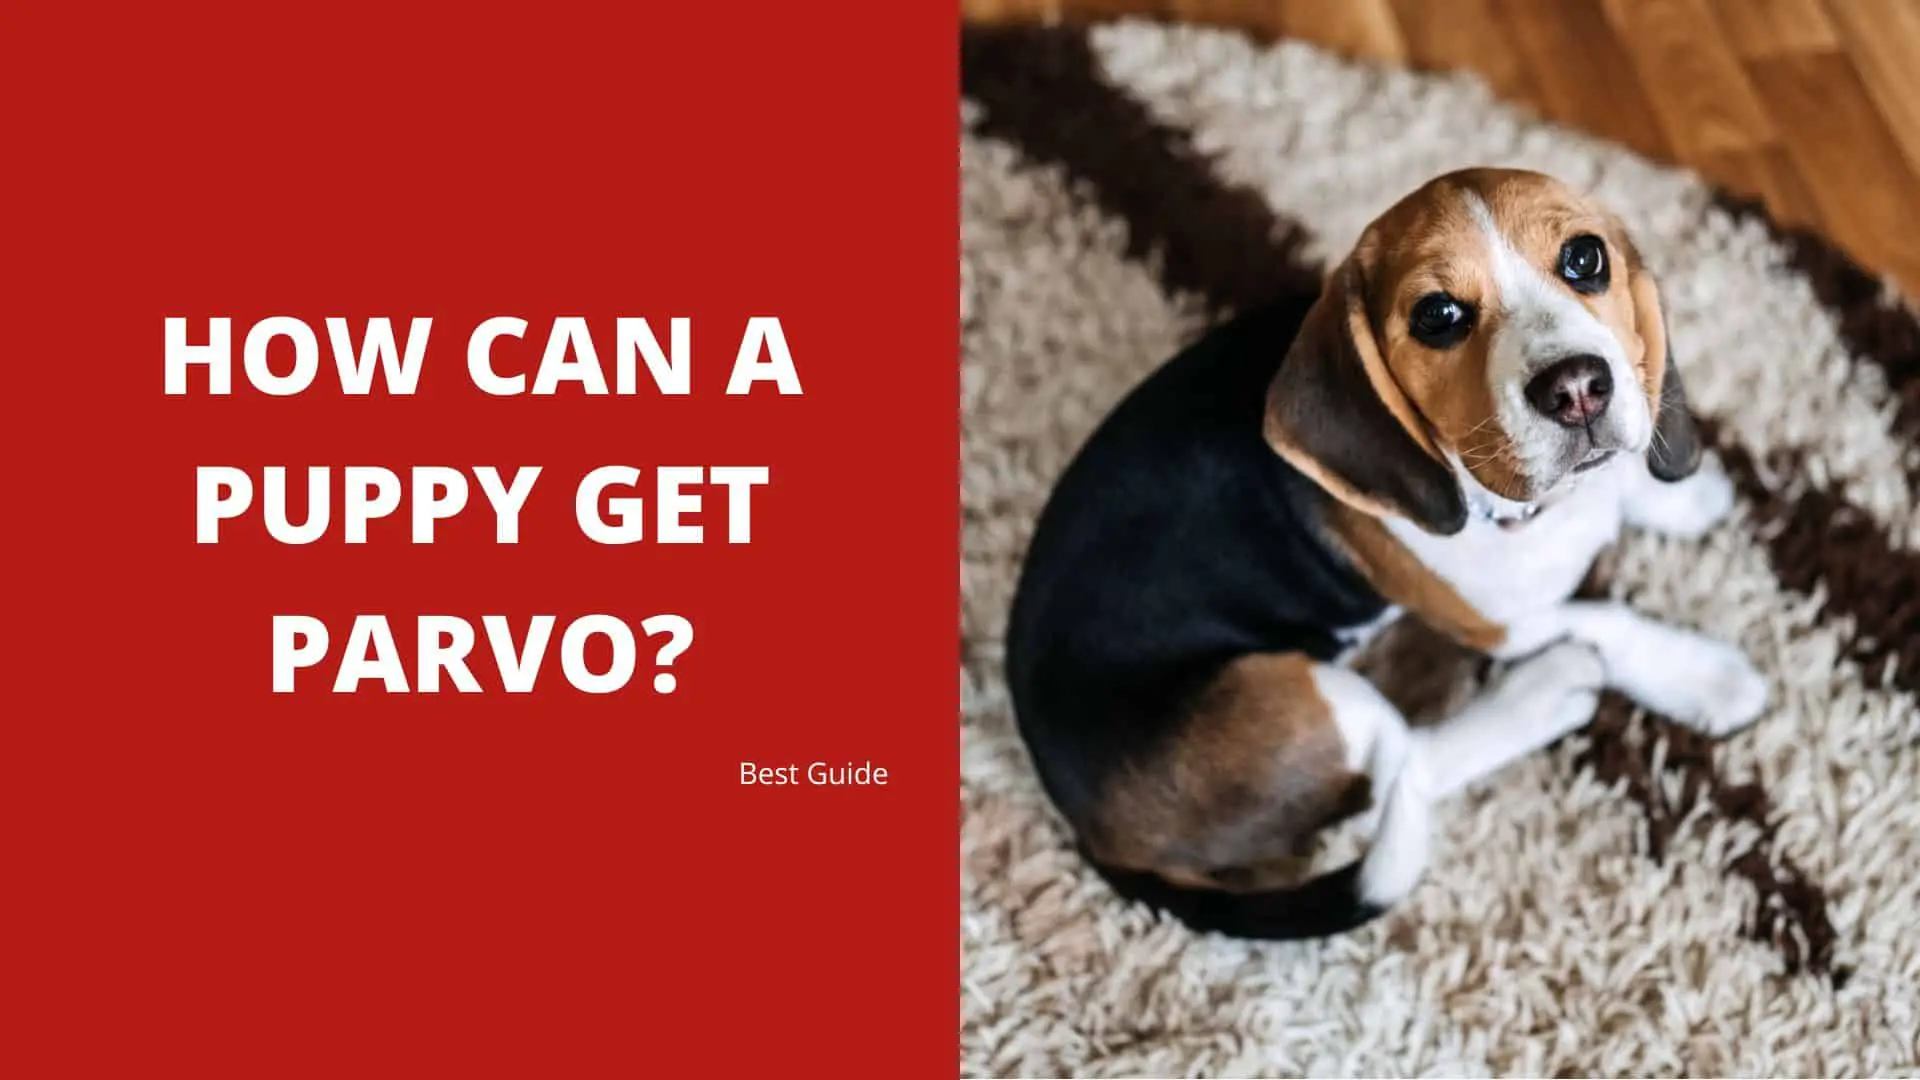 How Can a Puppy Get Parvo? Best Guide 2022